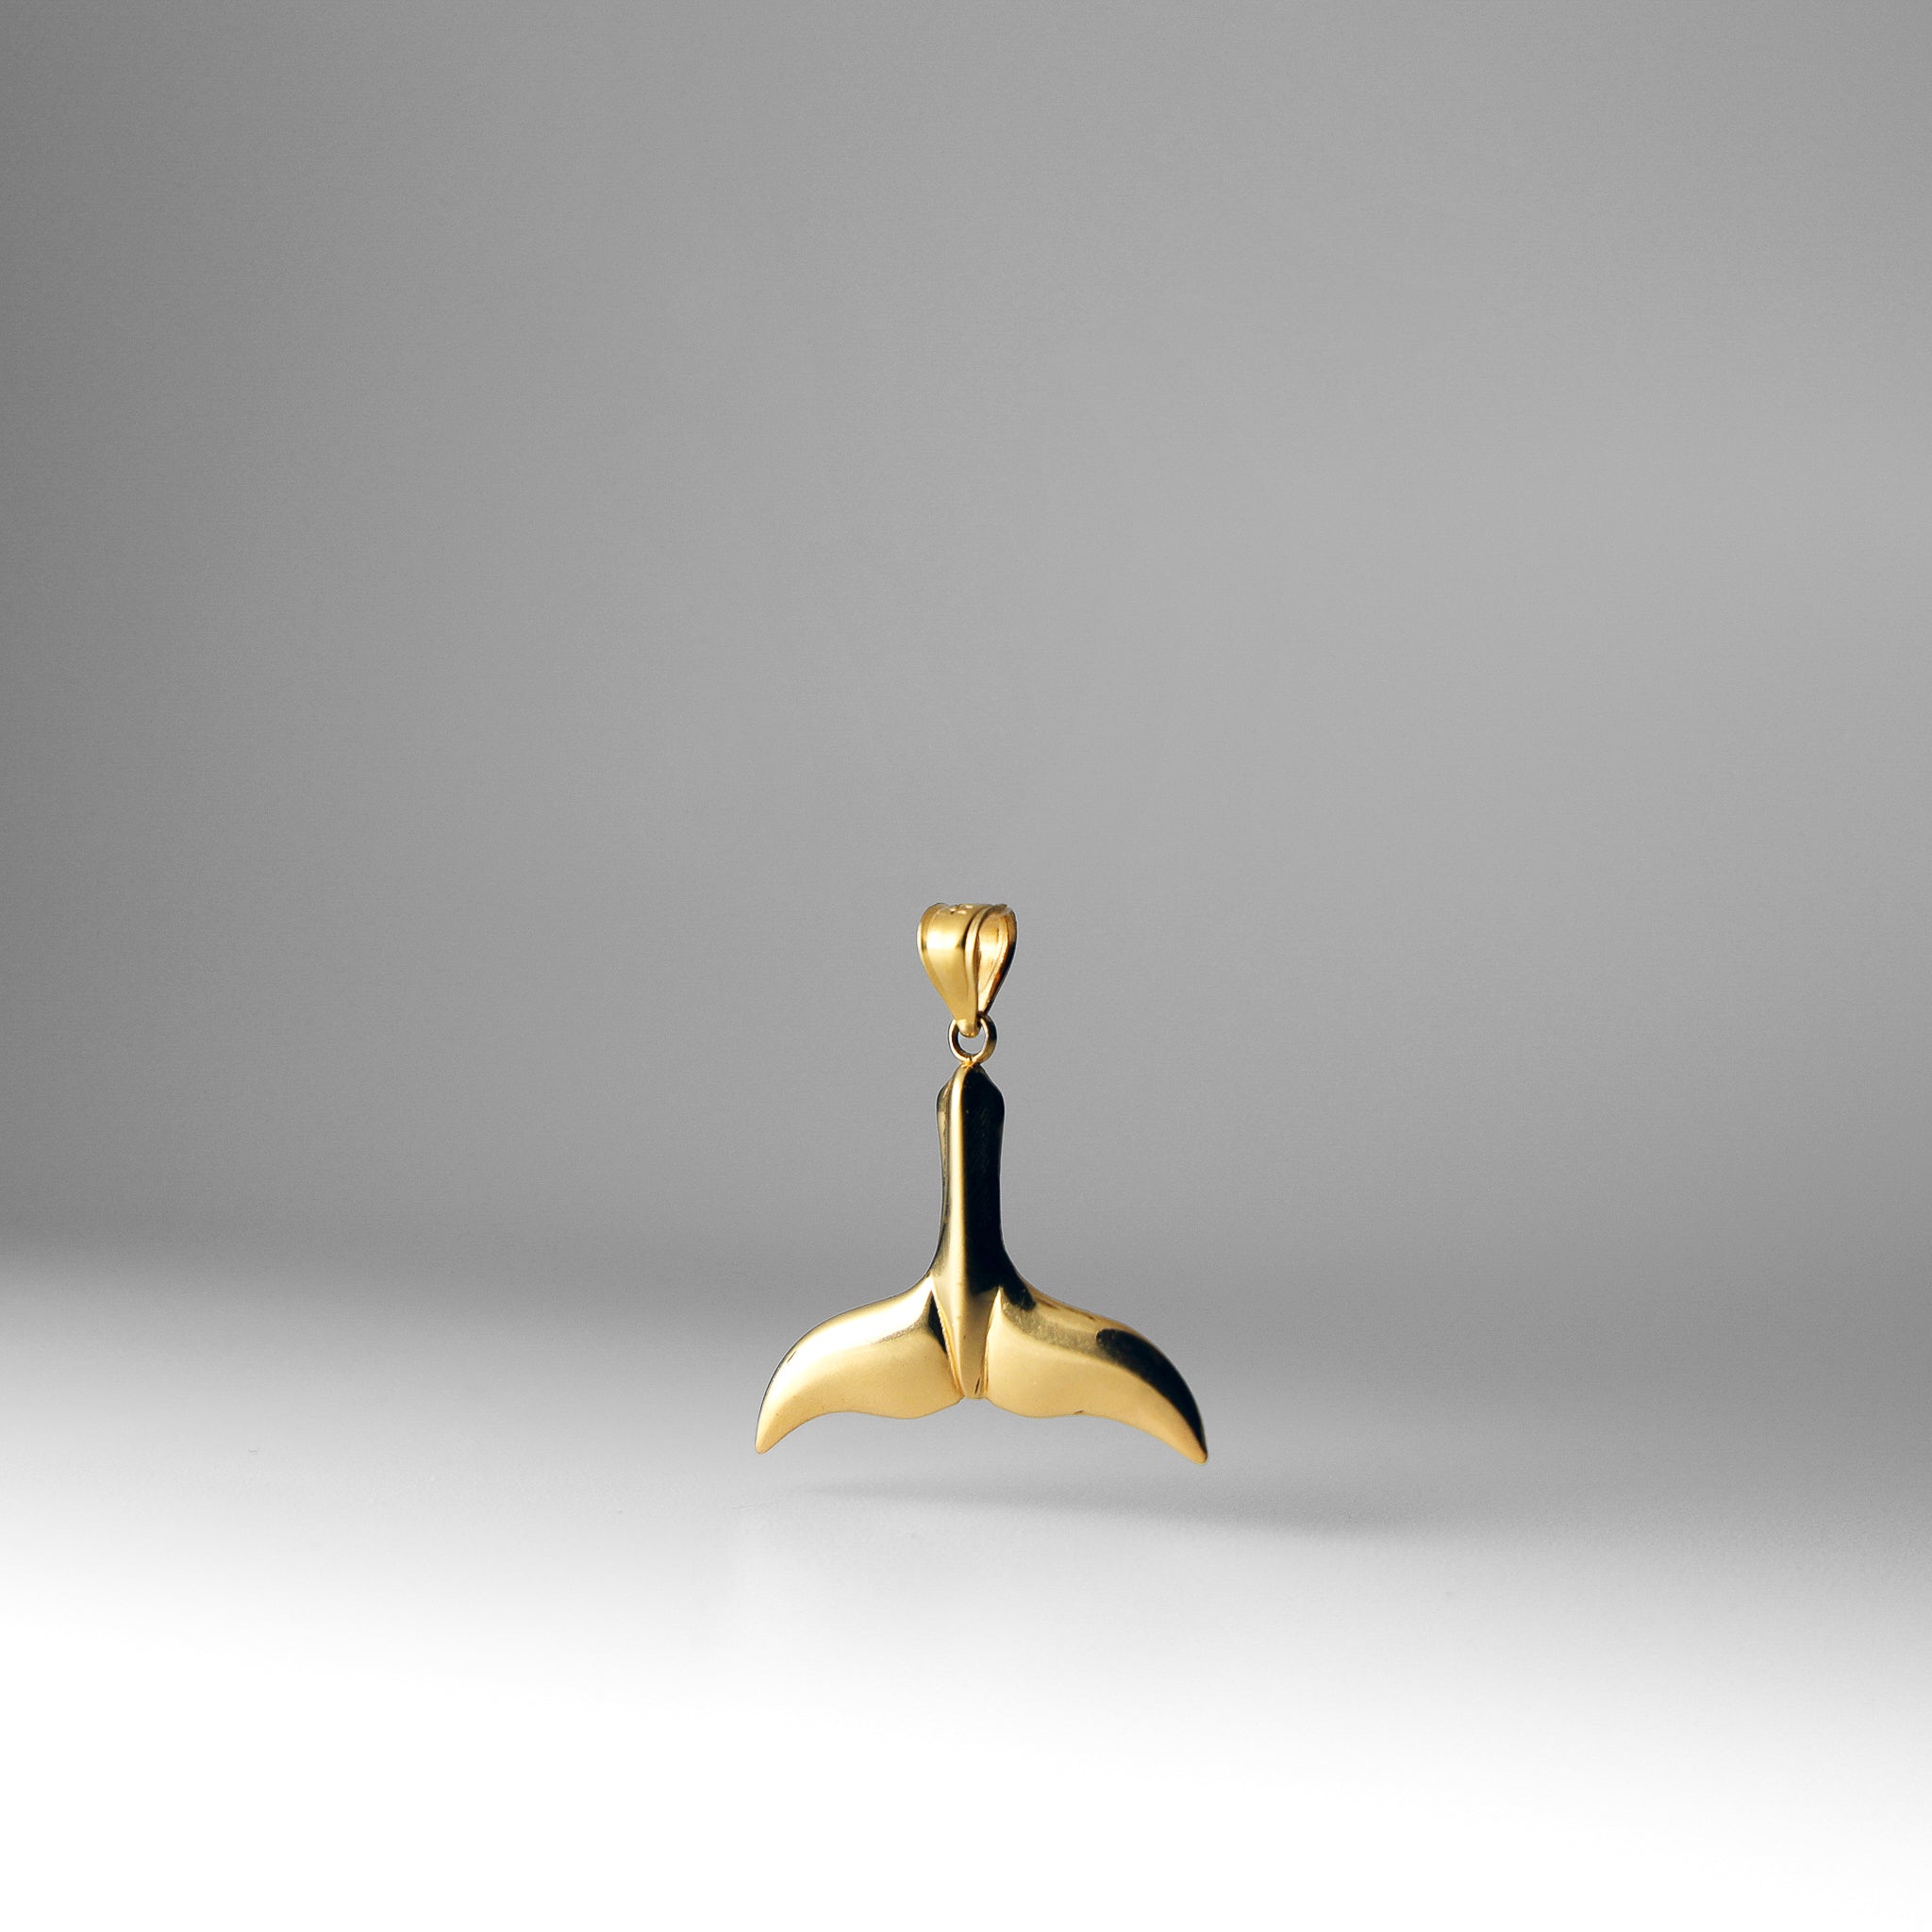 Gold Tail of Dolphin Pendant Model-1690